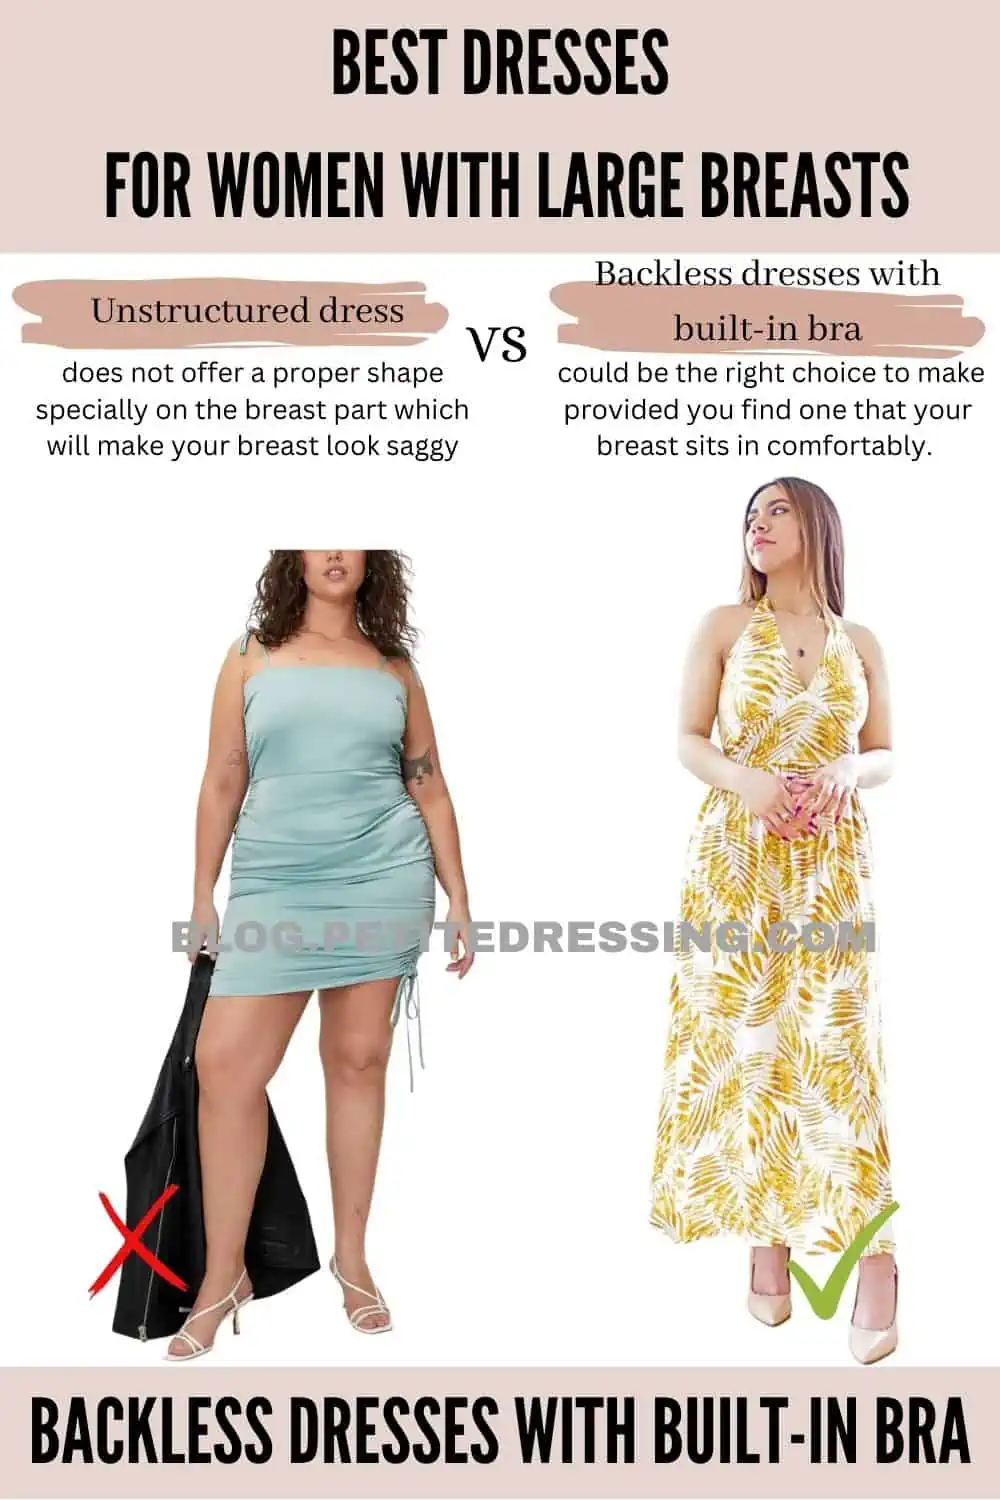 Styling Tips for Backless Dresses and Suitable Bra